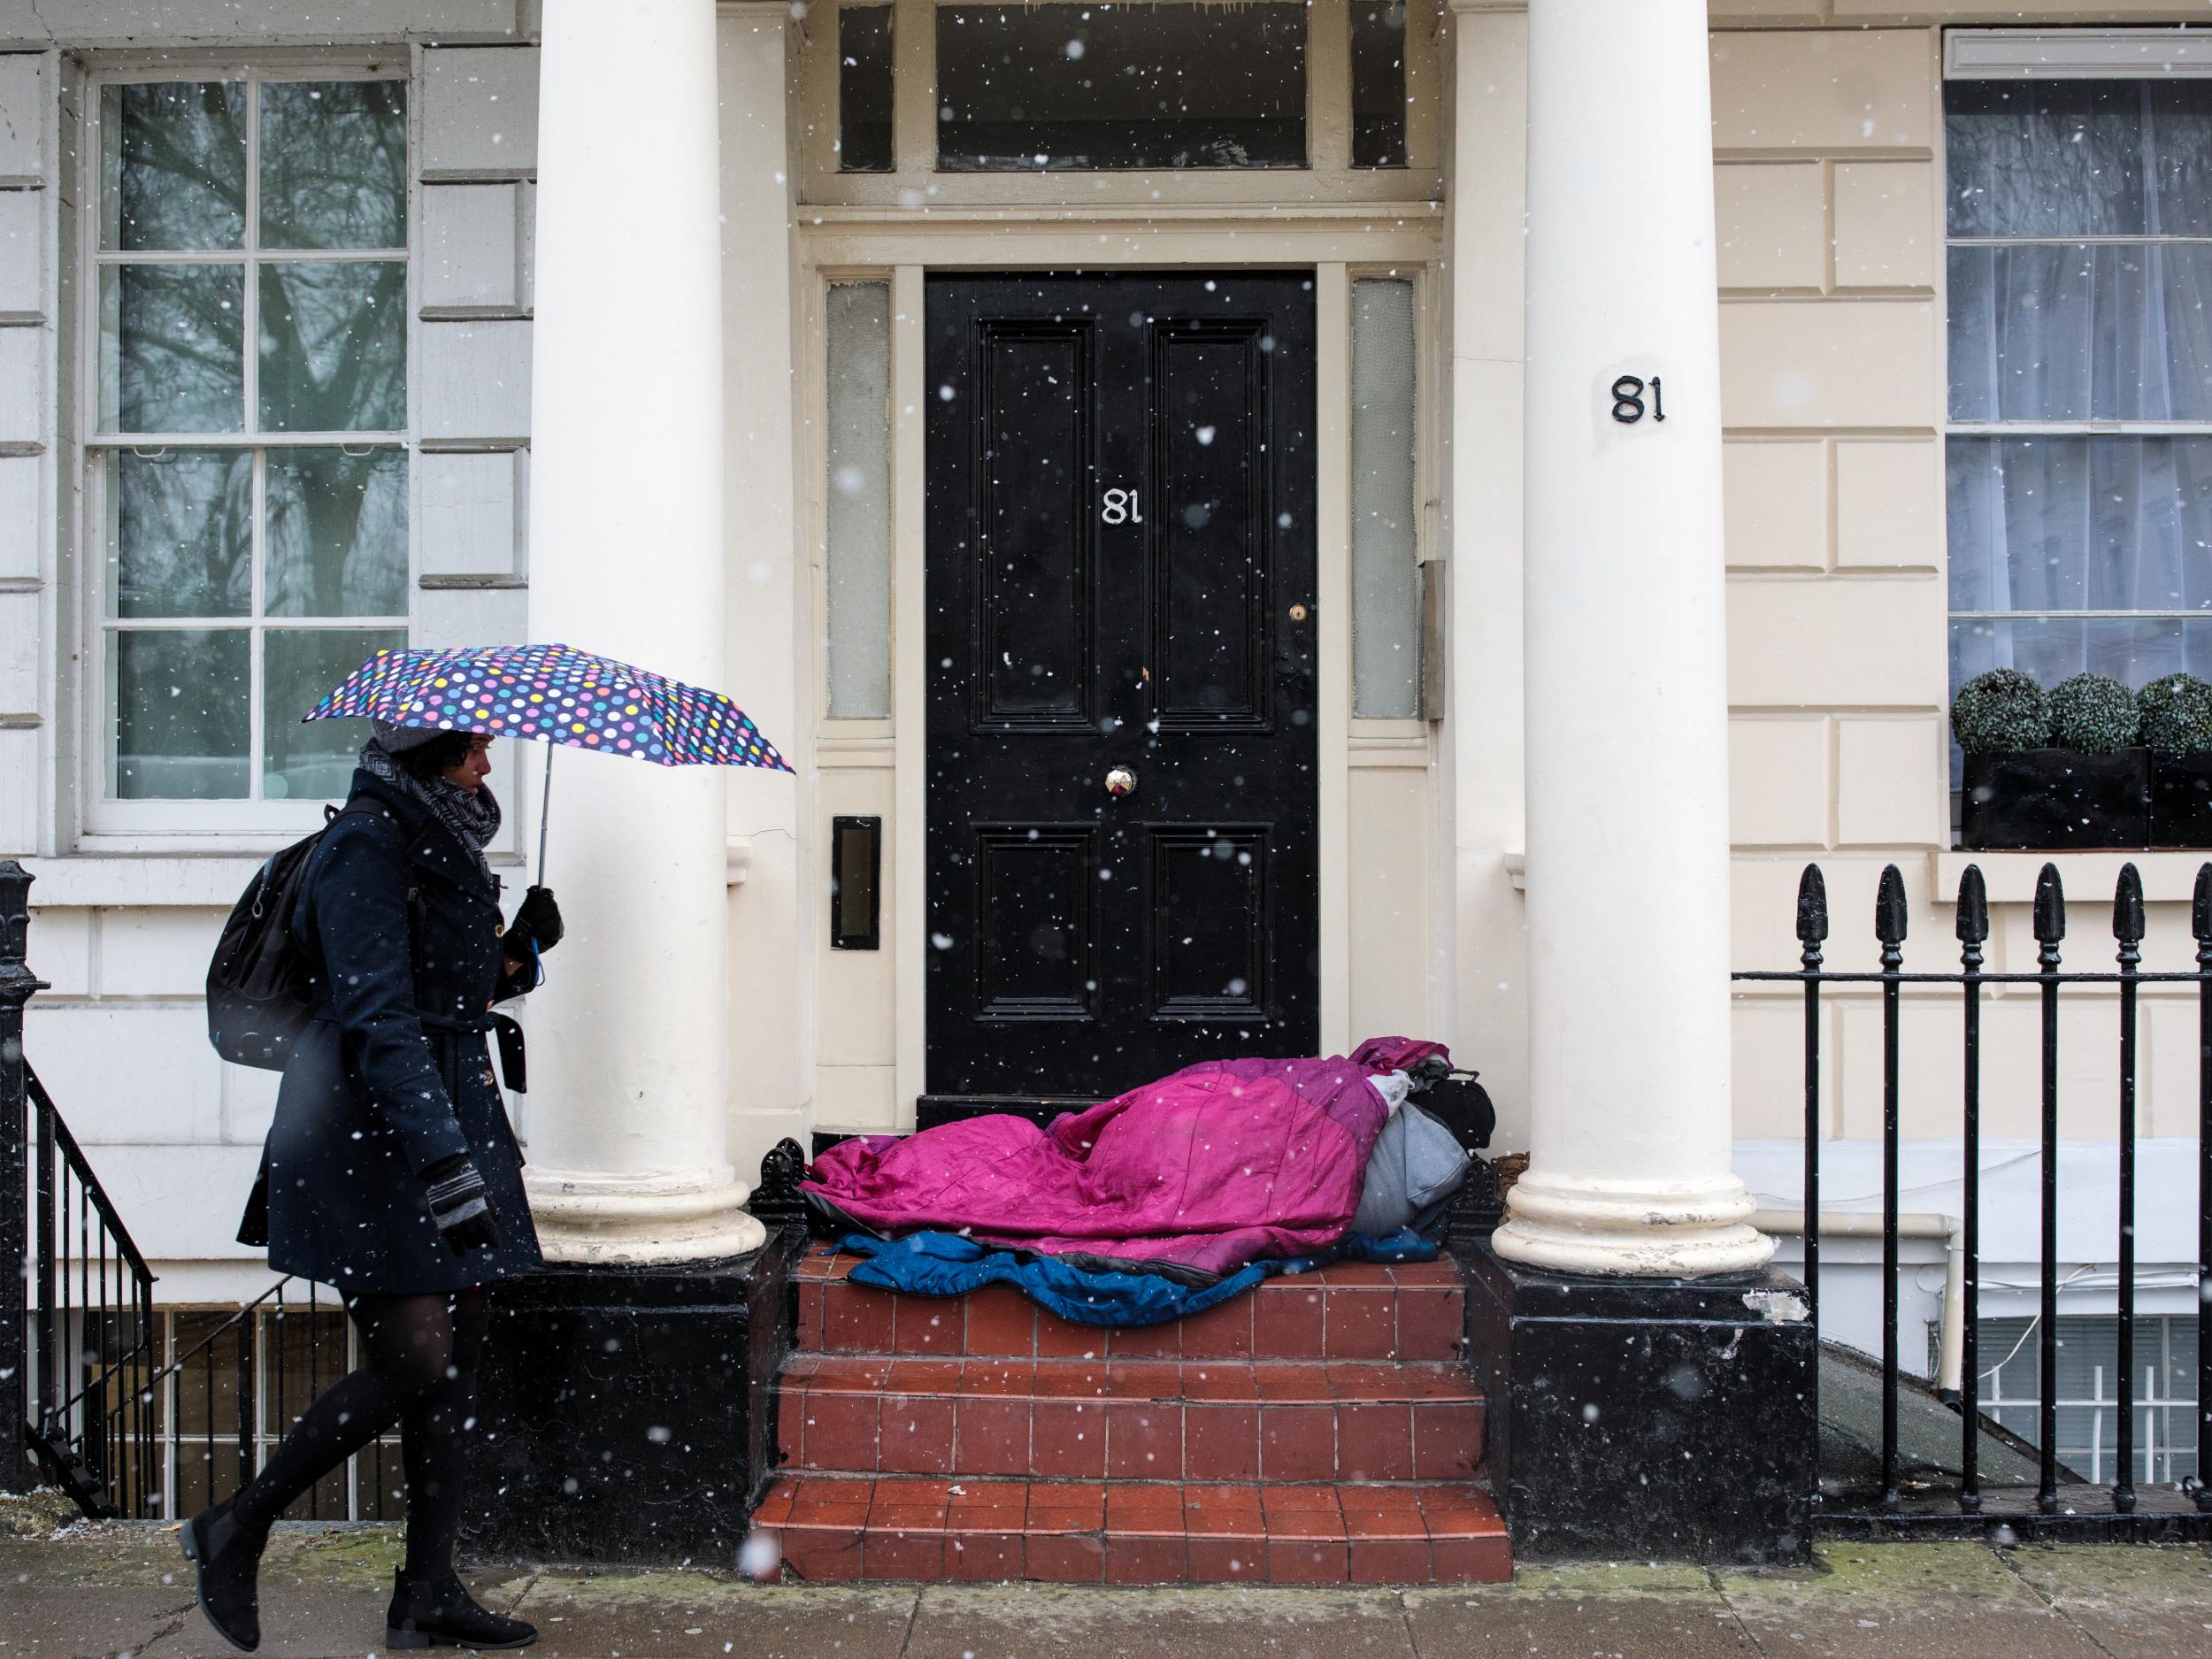 The number of homeless people recorded dying on the streets has more than doubled over the past five years in the UK